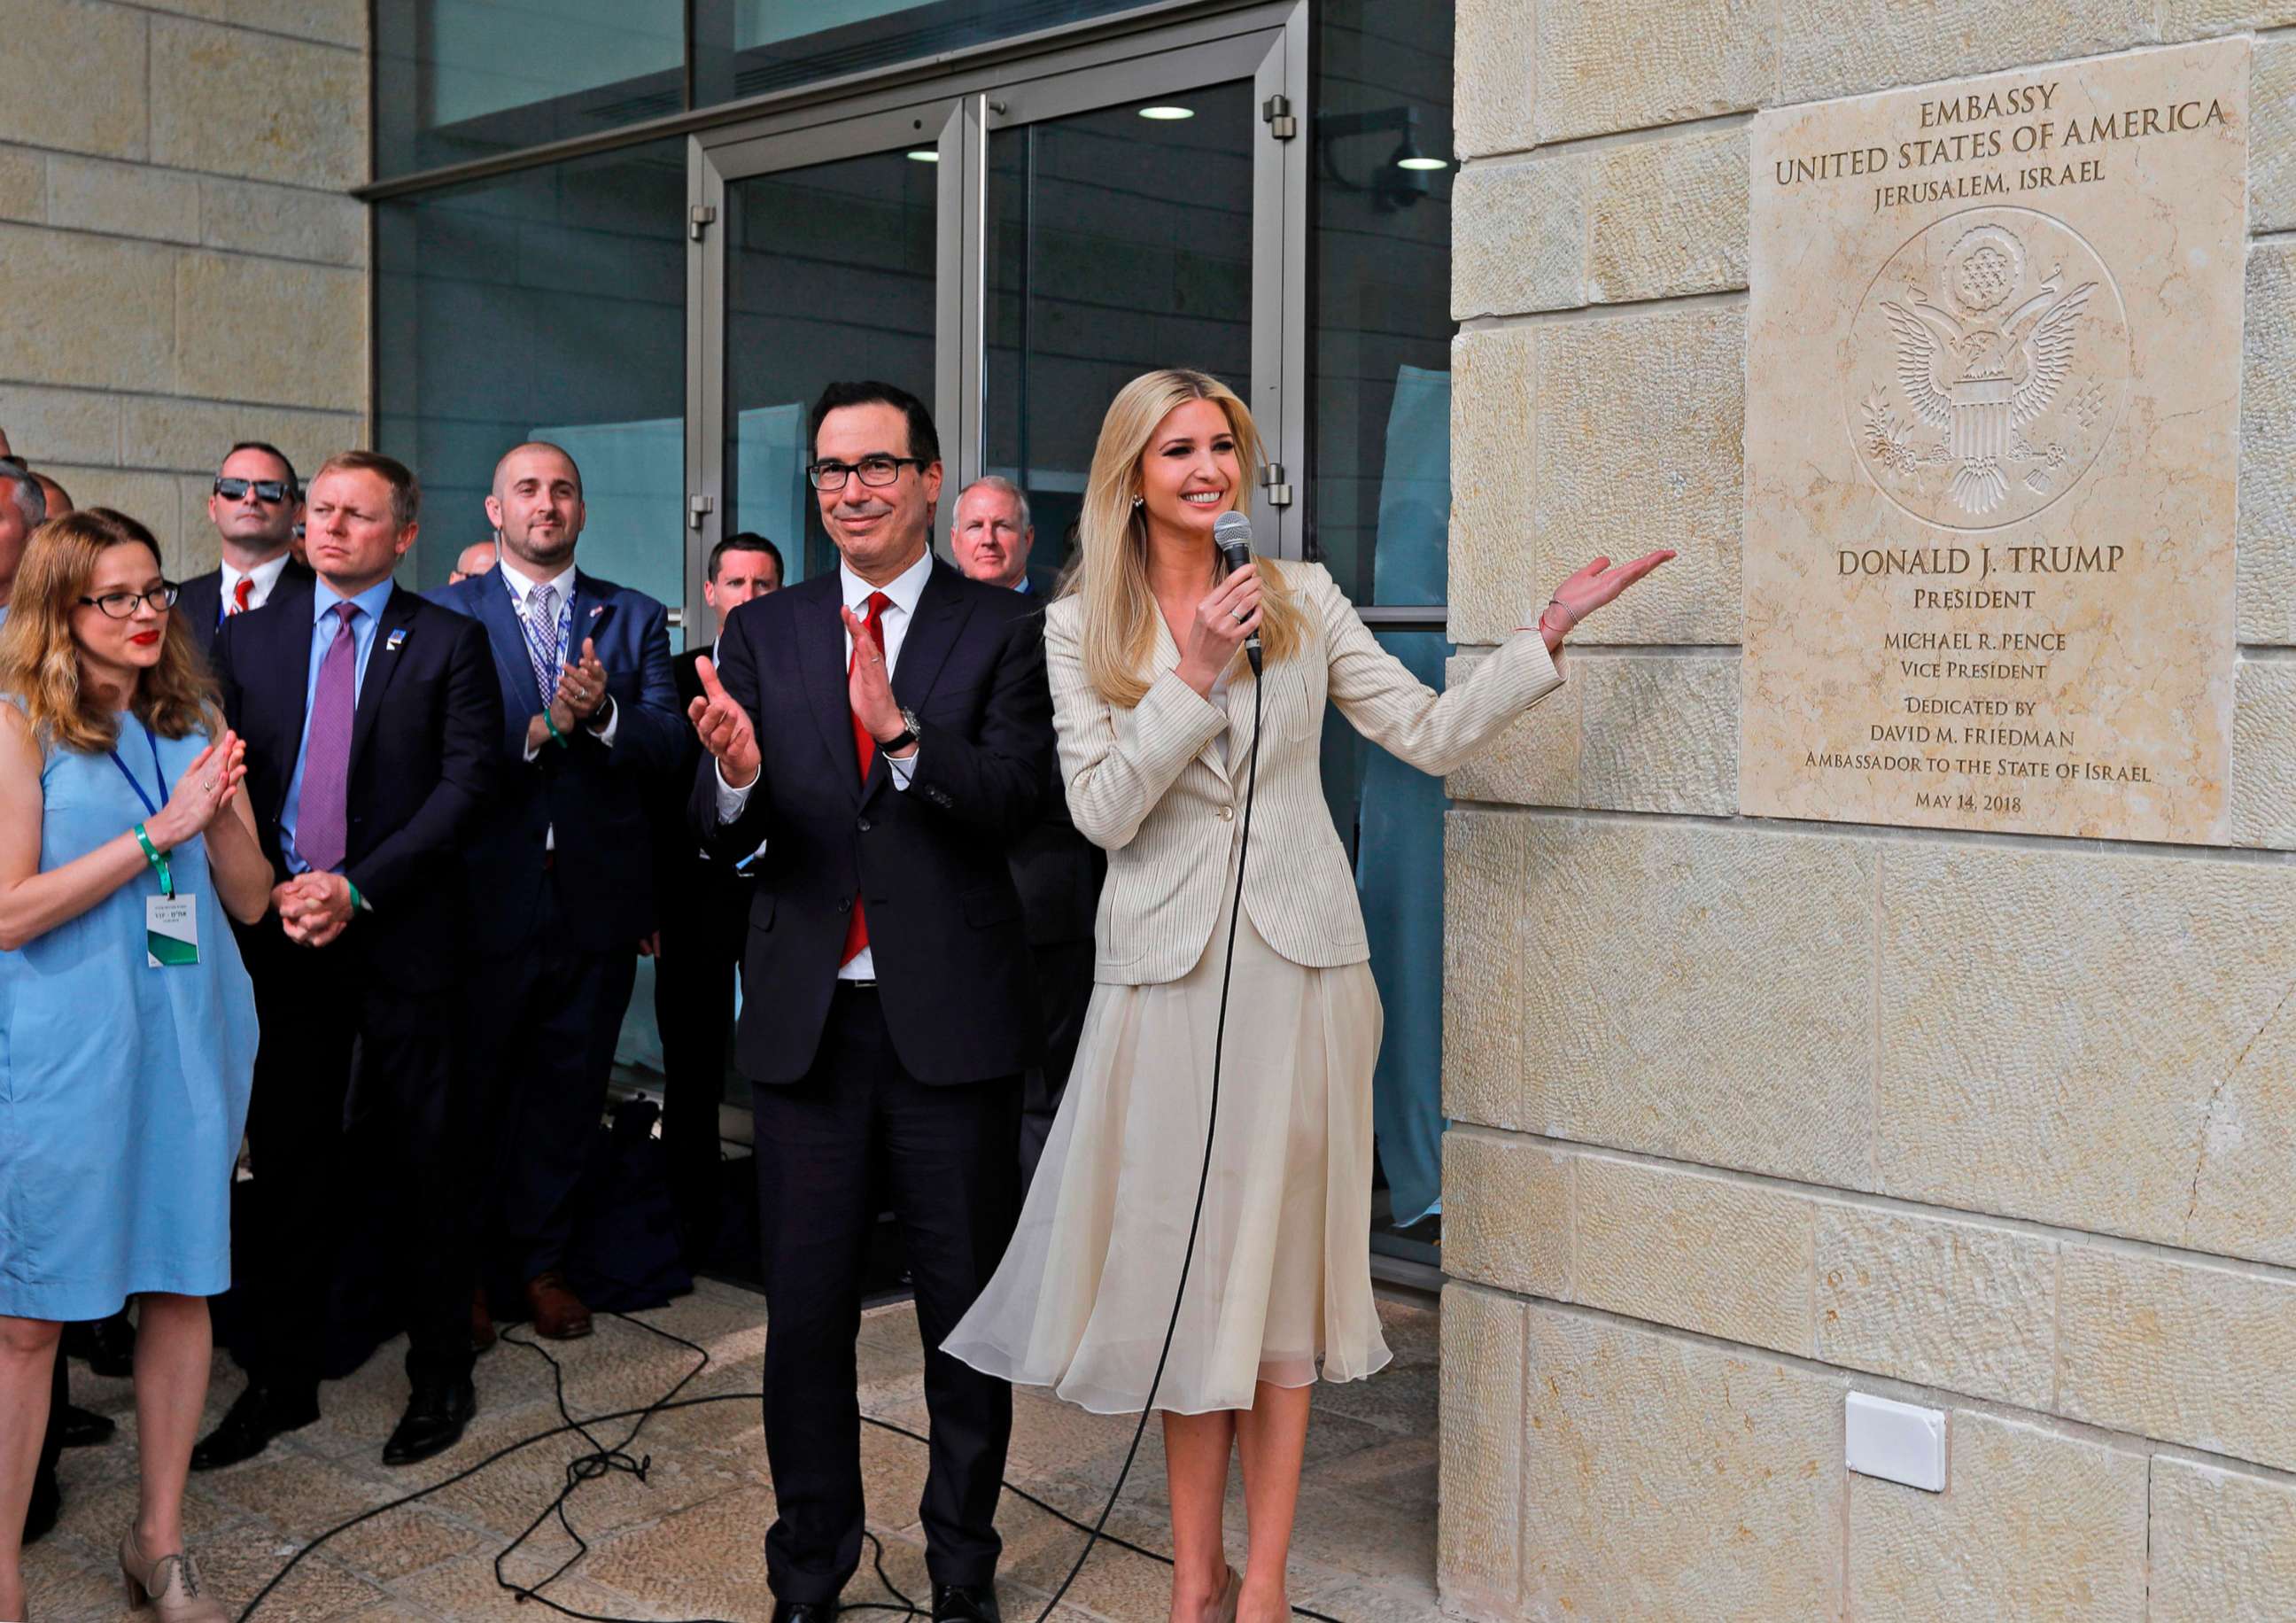 PHOTO: From left, Treasury Secretary Steve Mnuchin claps as White House senior advisor and President Trump's daughter Ivanka Trump unveils an inauguration plaque during the opening of the U.S. embassy in Jerusalem, May 14, 2018.